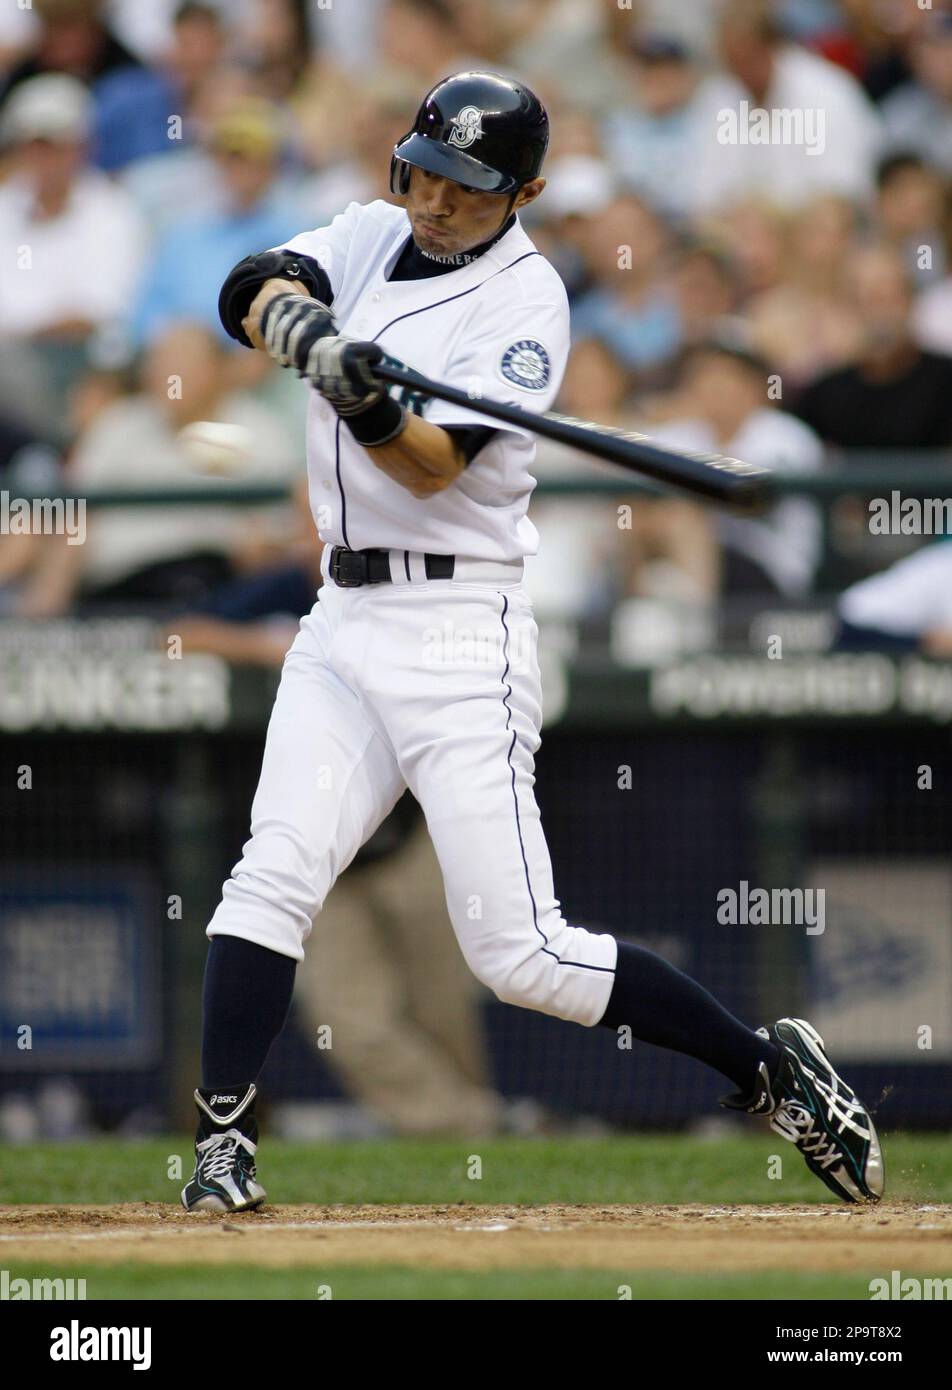 Seattle Mariners' Ichiro Suzuki singles in the third inning of a baseball game against the Minnesota Twins, Tuesday, Aug. 5, 2008, in Seattle. (AP Photo/Ted S. Warren) Foto Stock